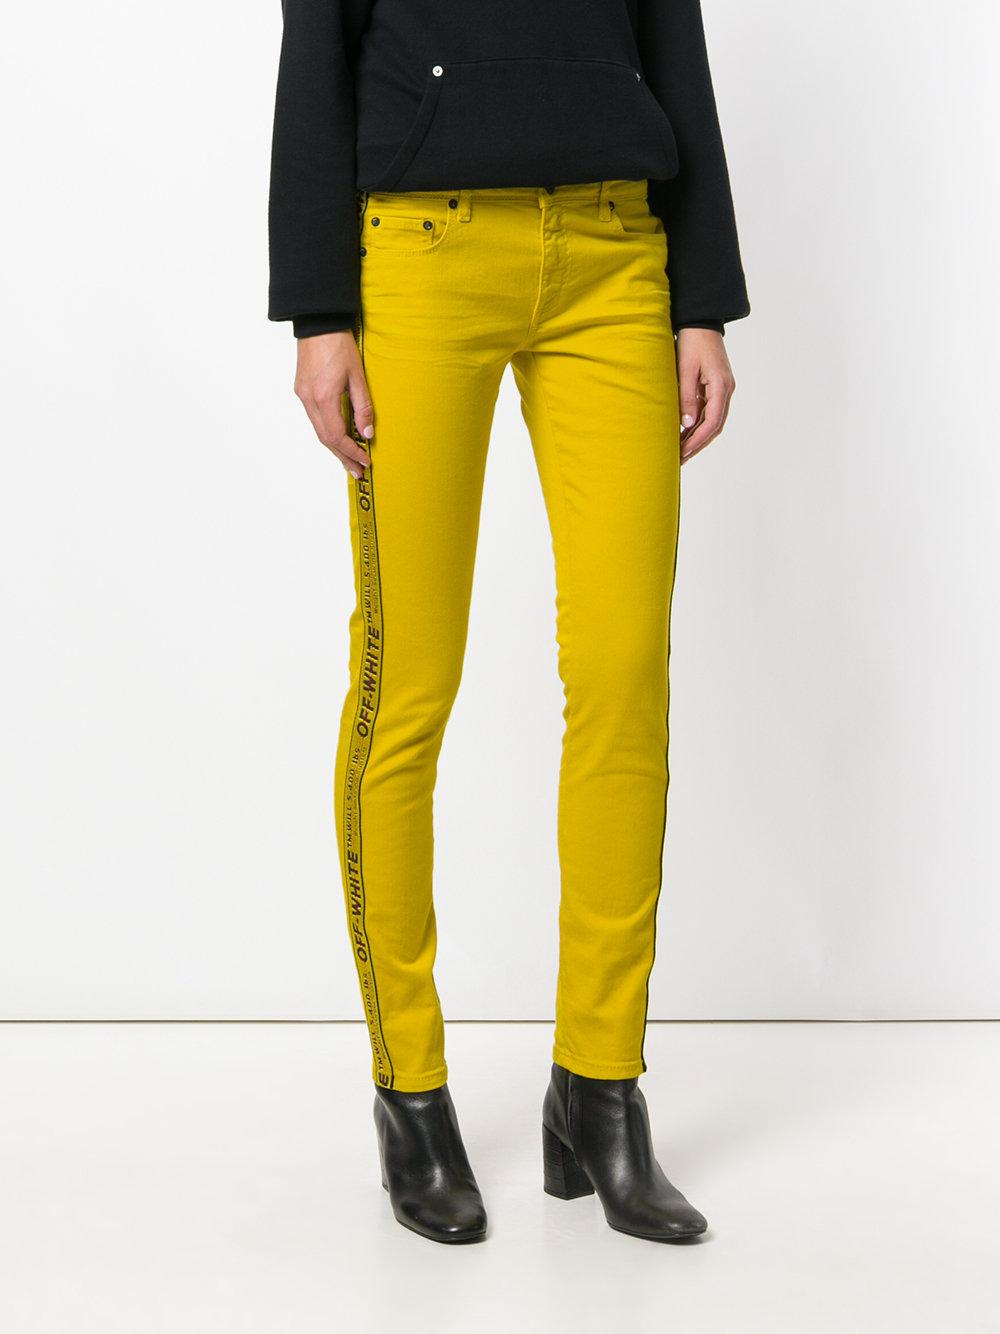 Off-White c/o Virgil Abloh Industrial Stripe Skinny Jeans in Yellow - Lyst